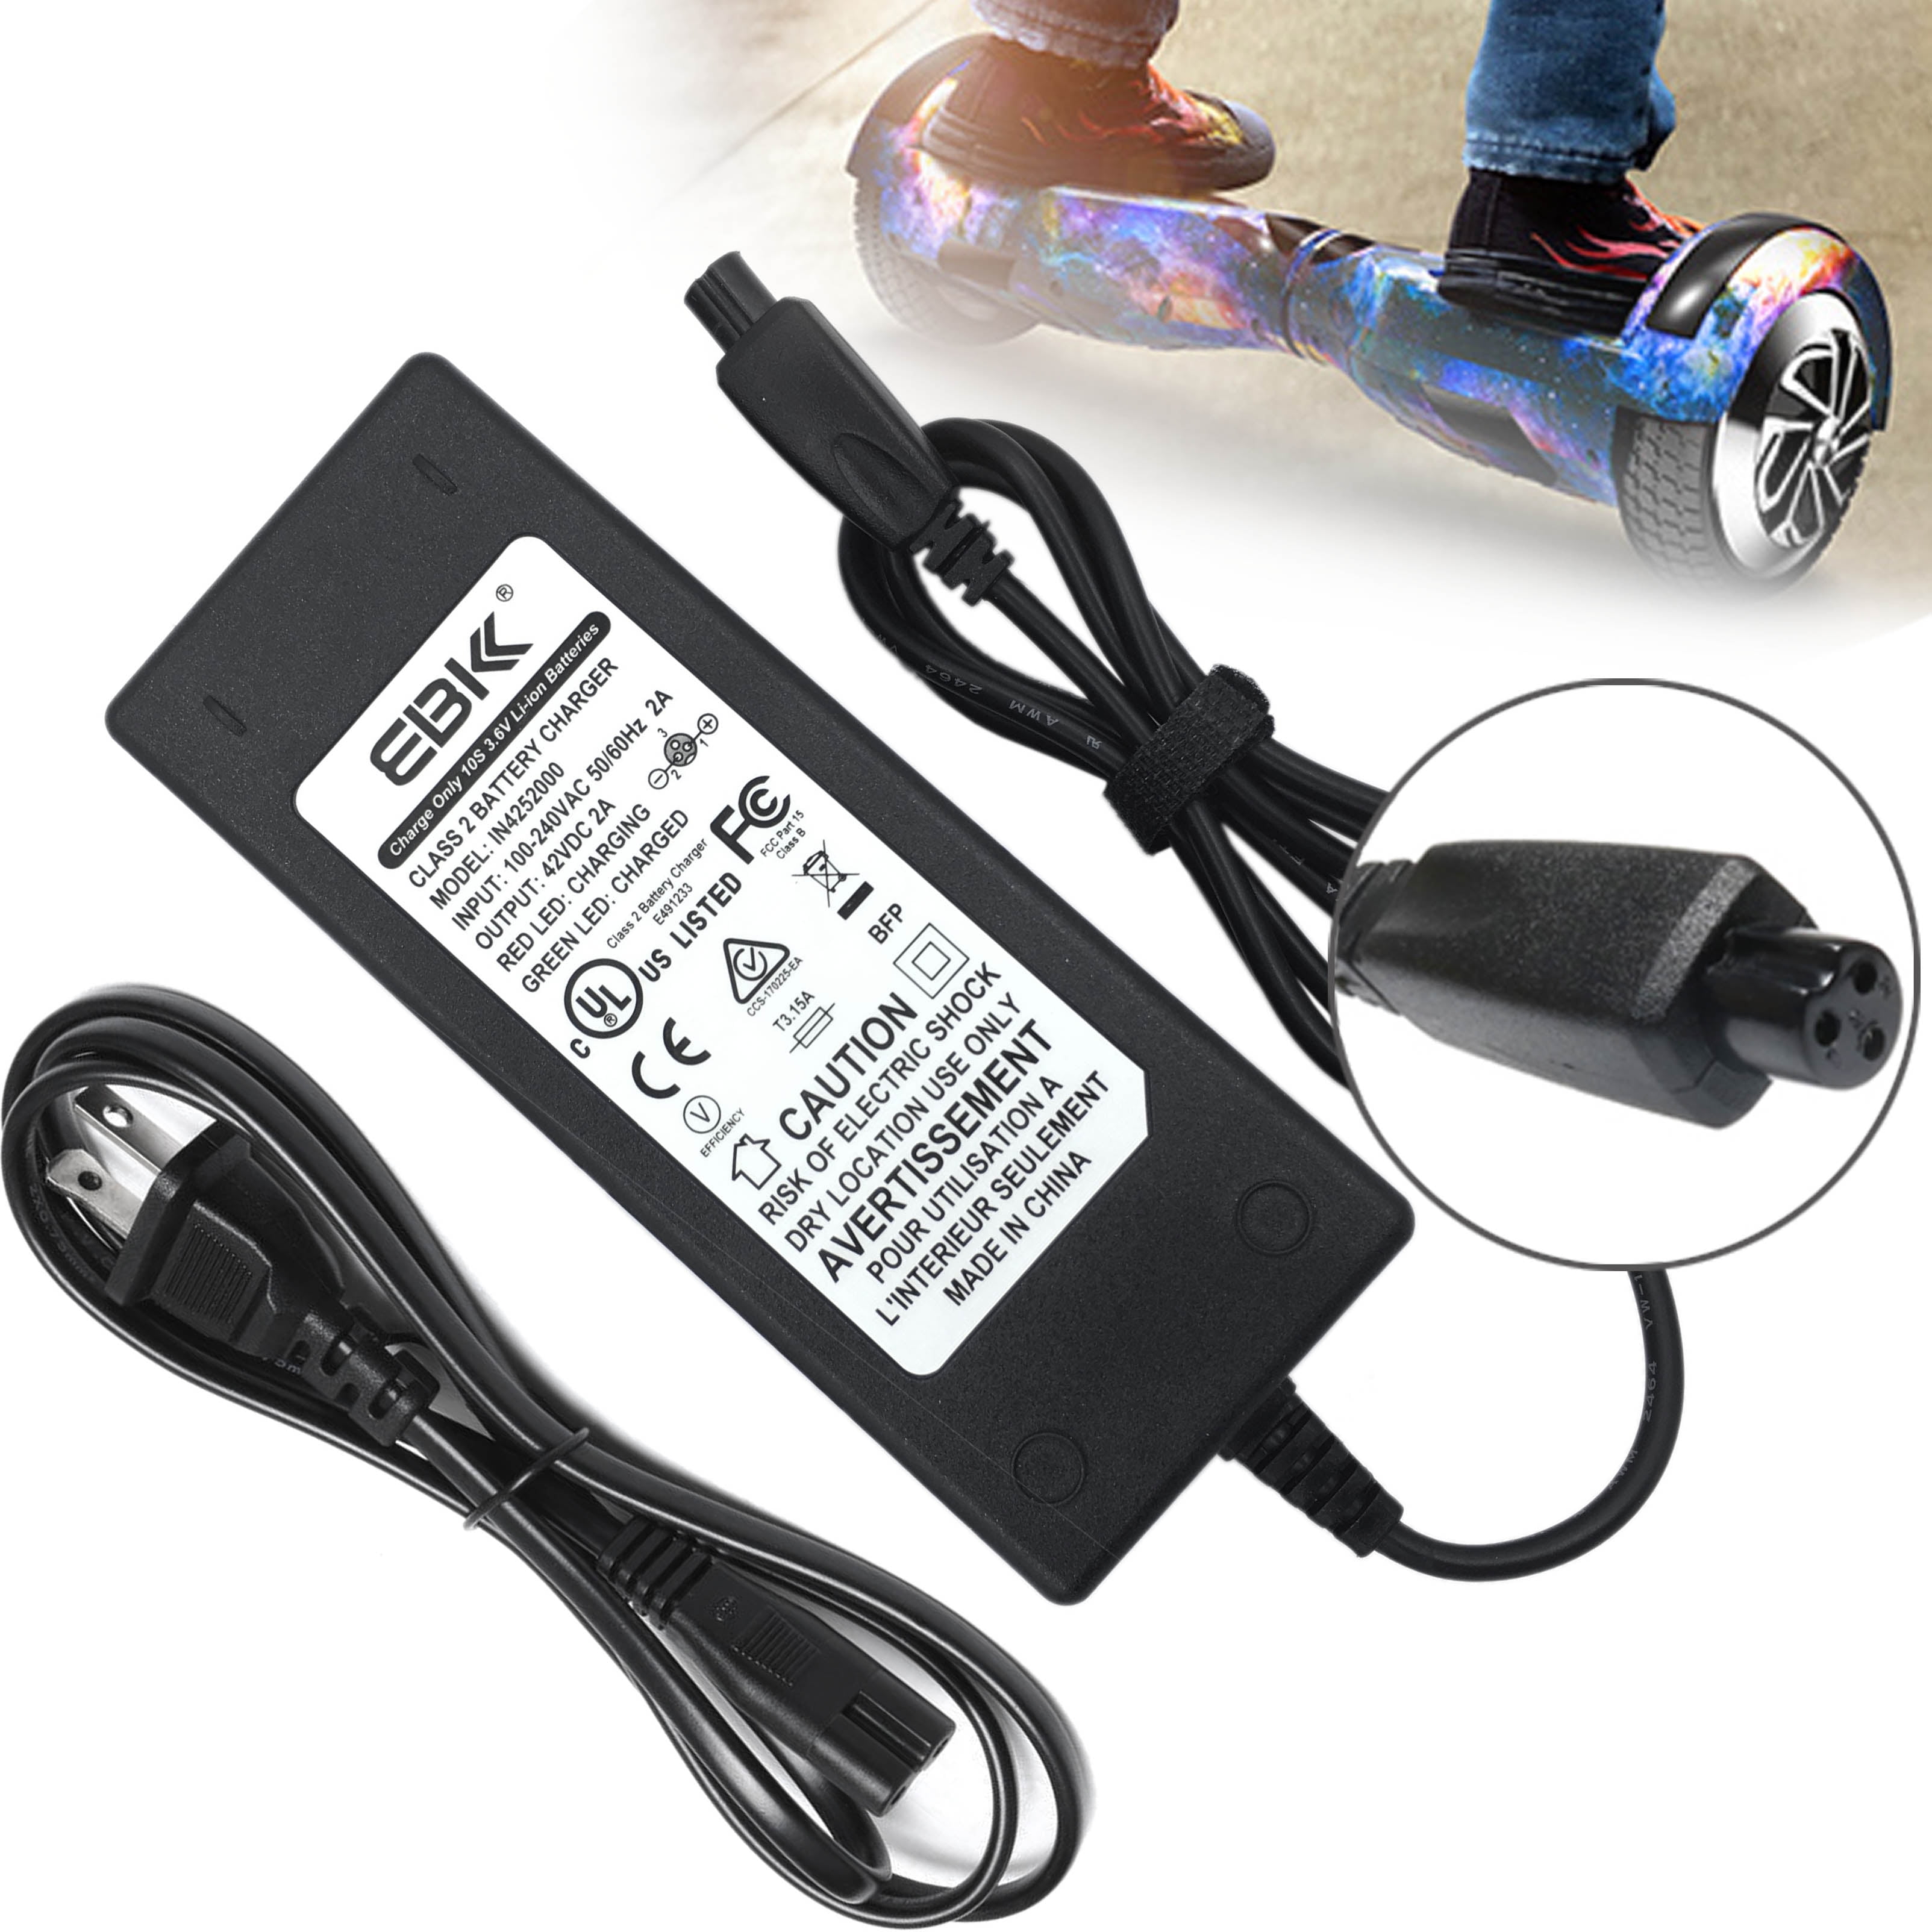 24V 42V 1A/2A Battery Charger for Lithium Self Balancing Electric Scooter Wheel